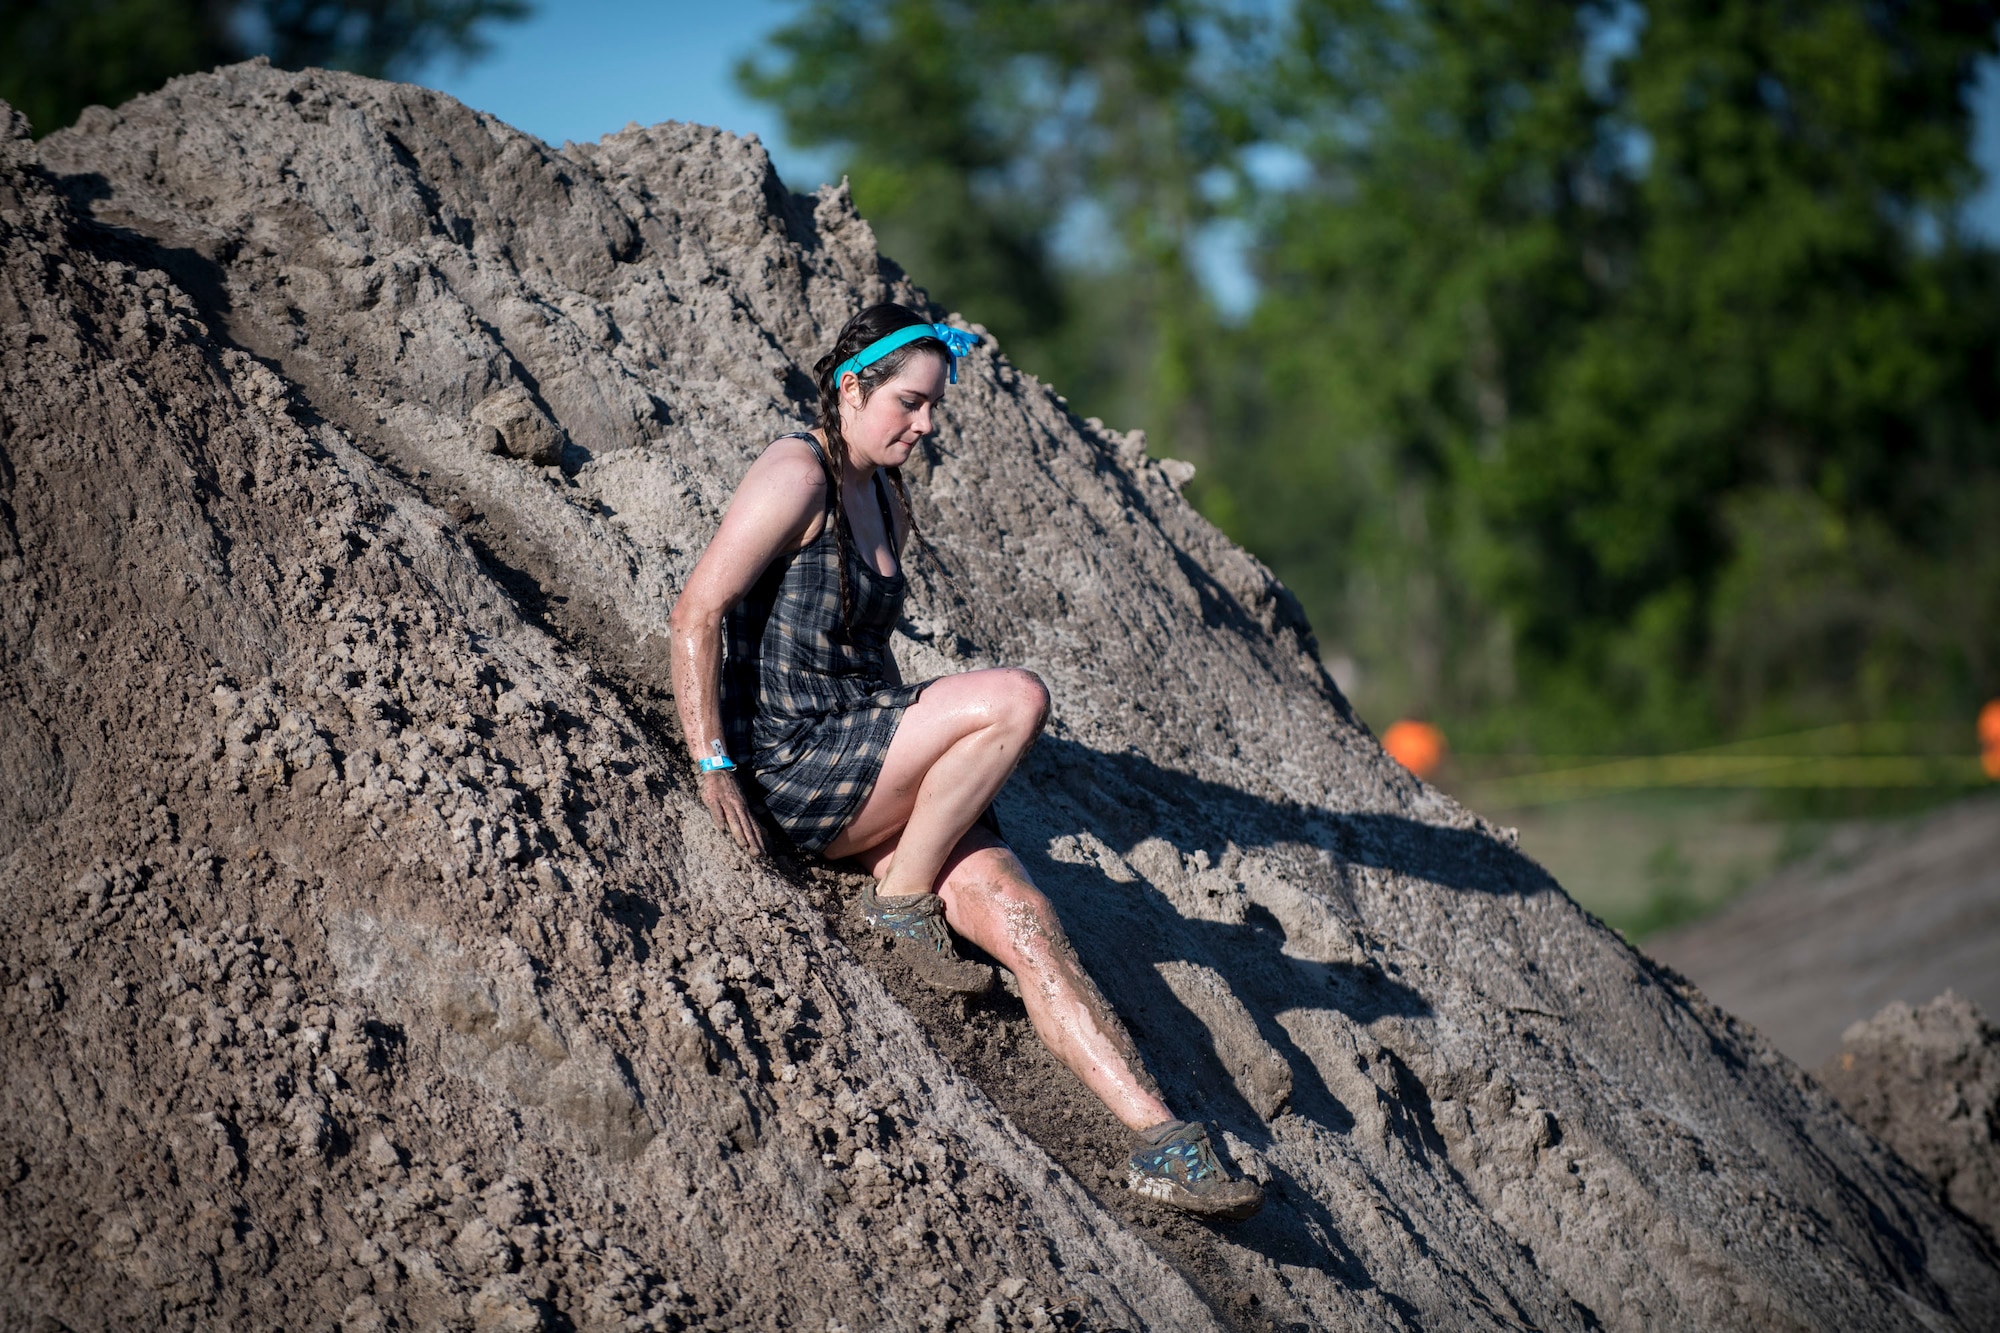 A participant slides down a dirt mound during the annual Moody Mud Run, May 6, 2017, in Ray City, Ga. The Fourth Annual Moody Mud consisted of both adult and child course that challenged more than 600 participants with obstacles over 4.2 miles. (U.S. Air Force photo by Airman 1st Class Daniel Snider)